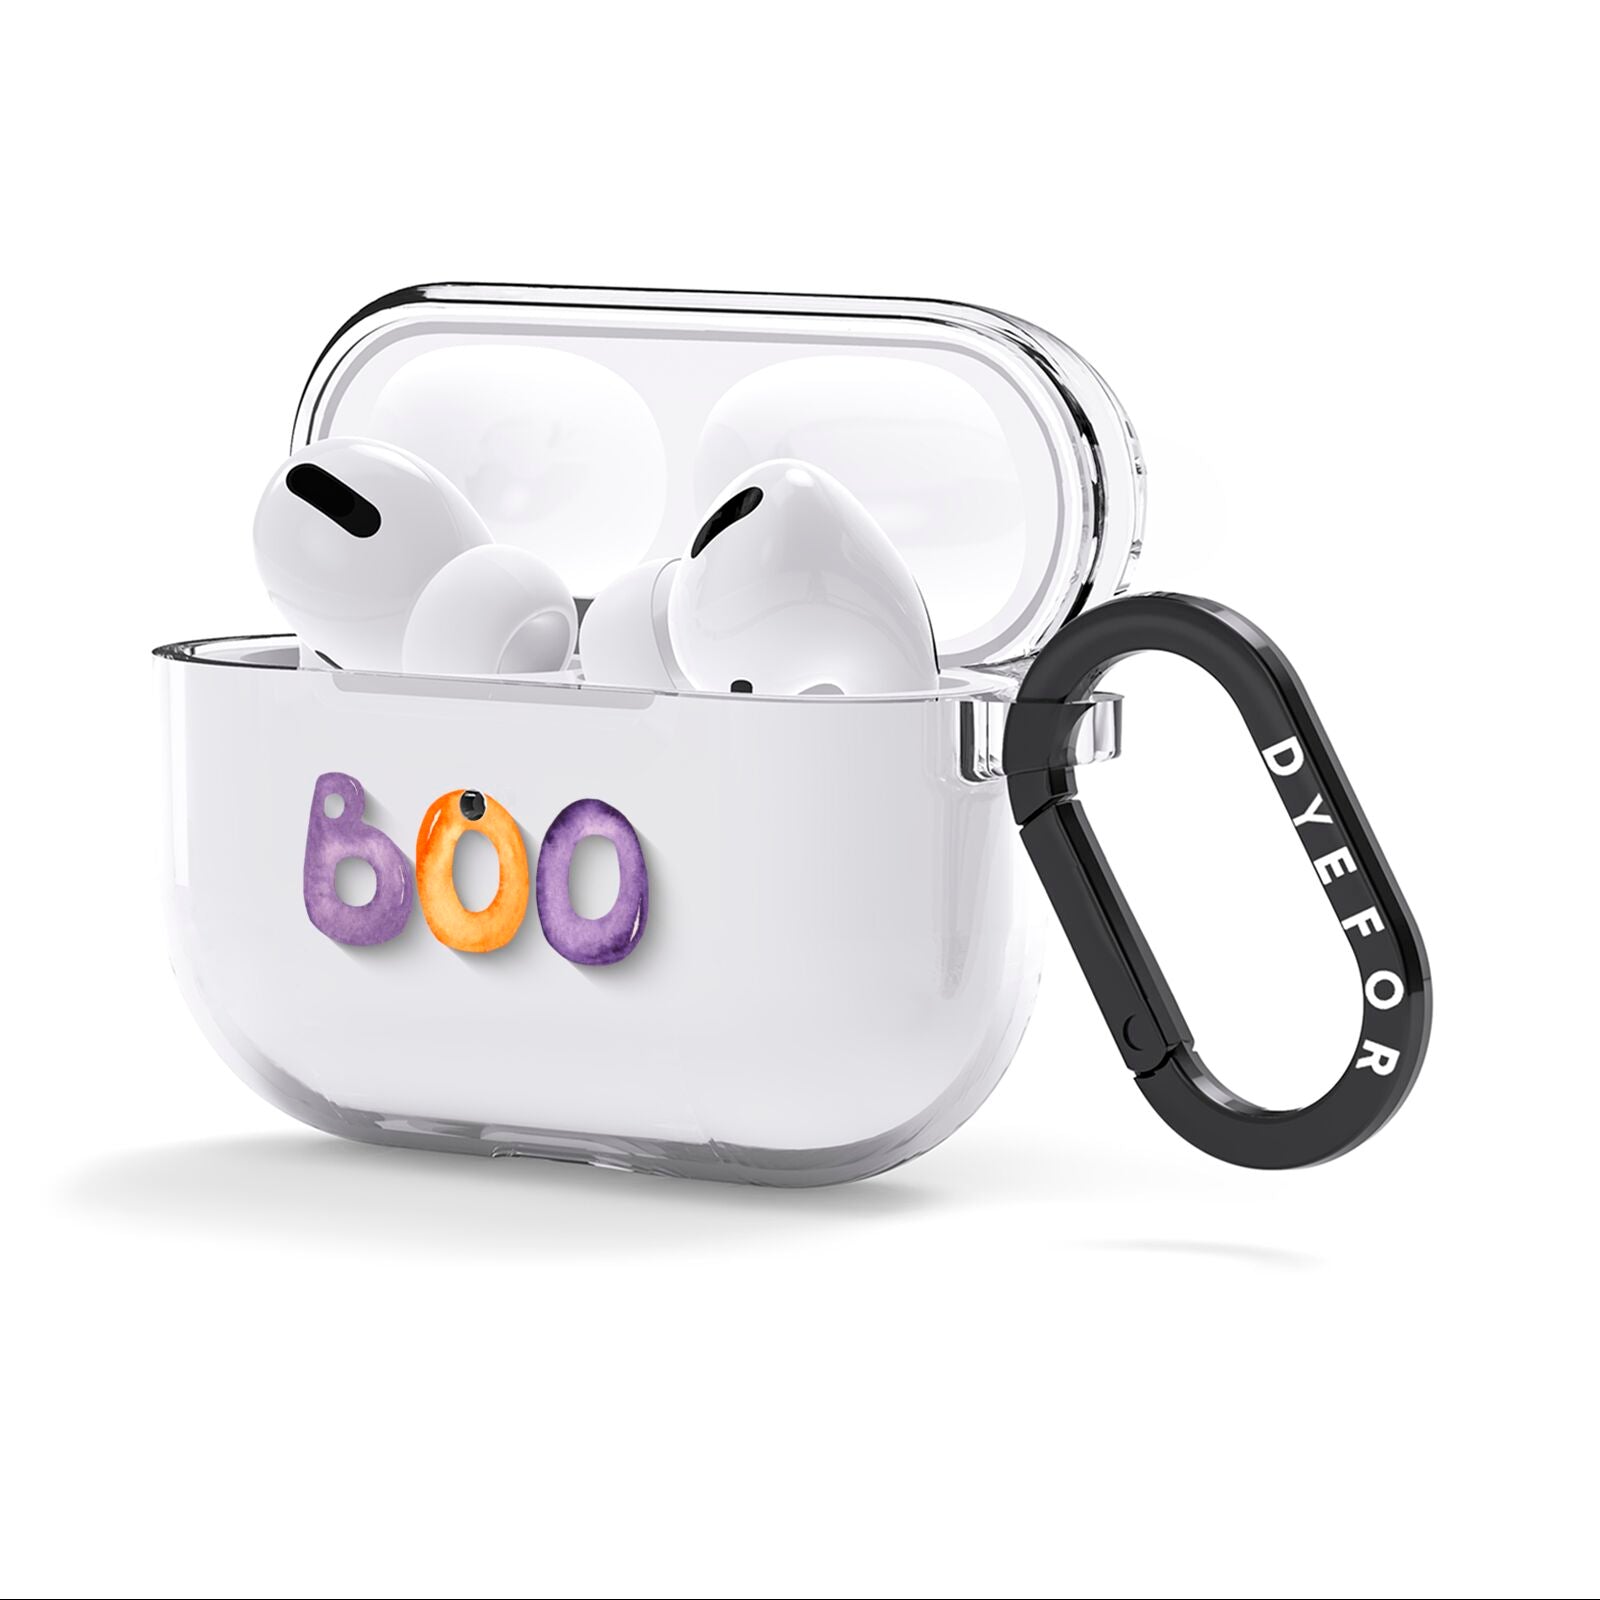 Boo AirPods Clear Case 3rd Gen Side Image